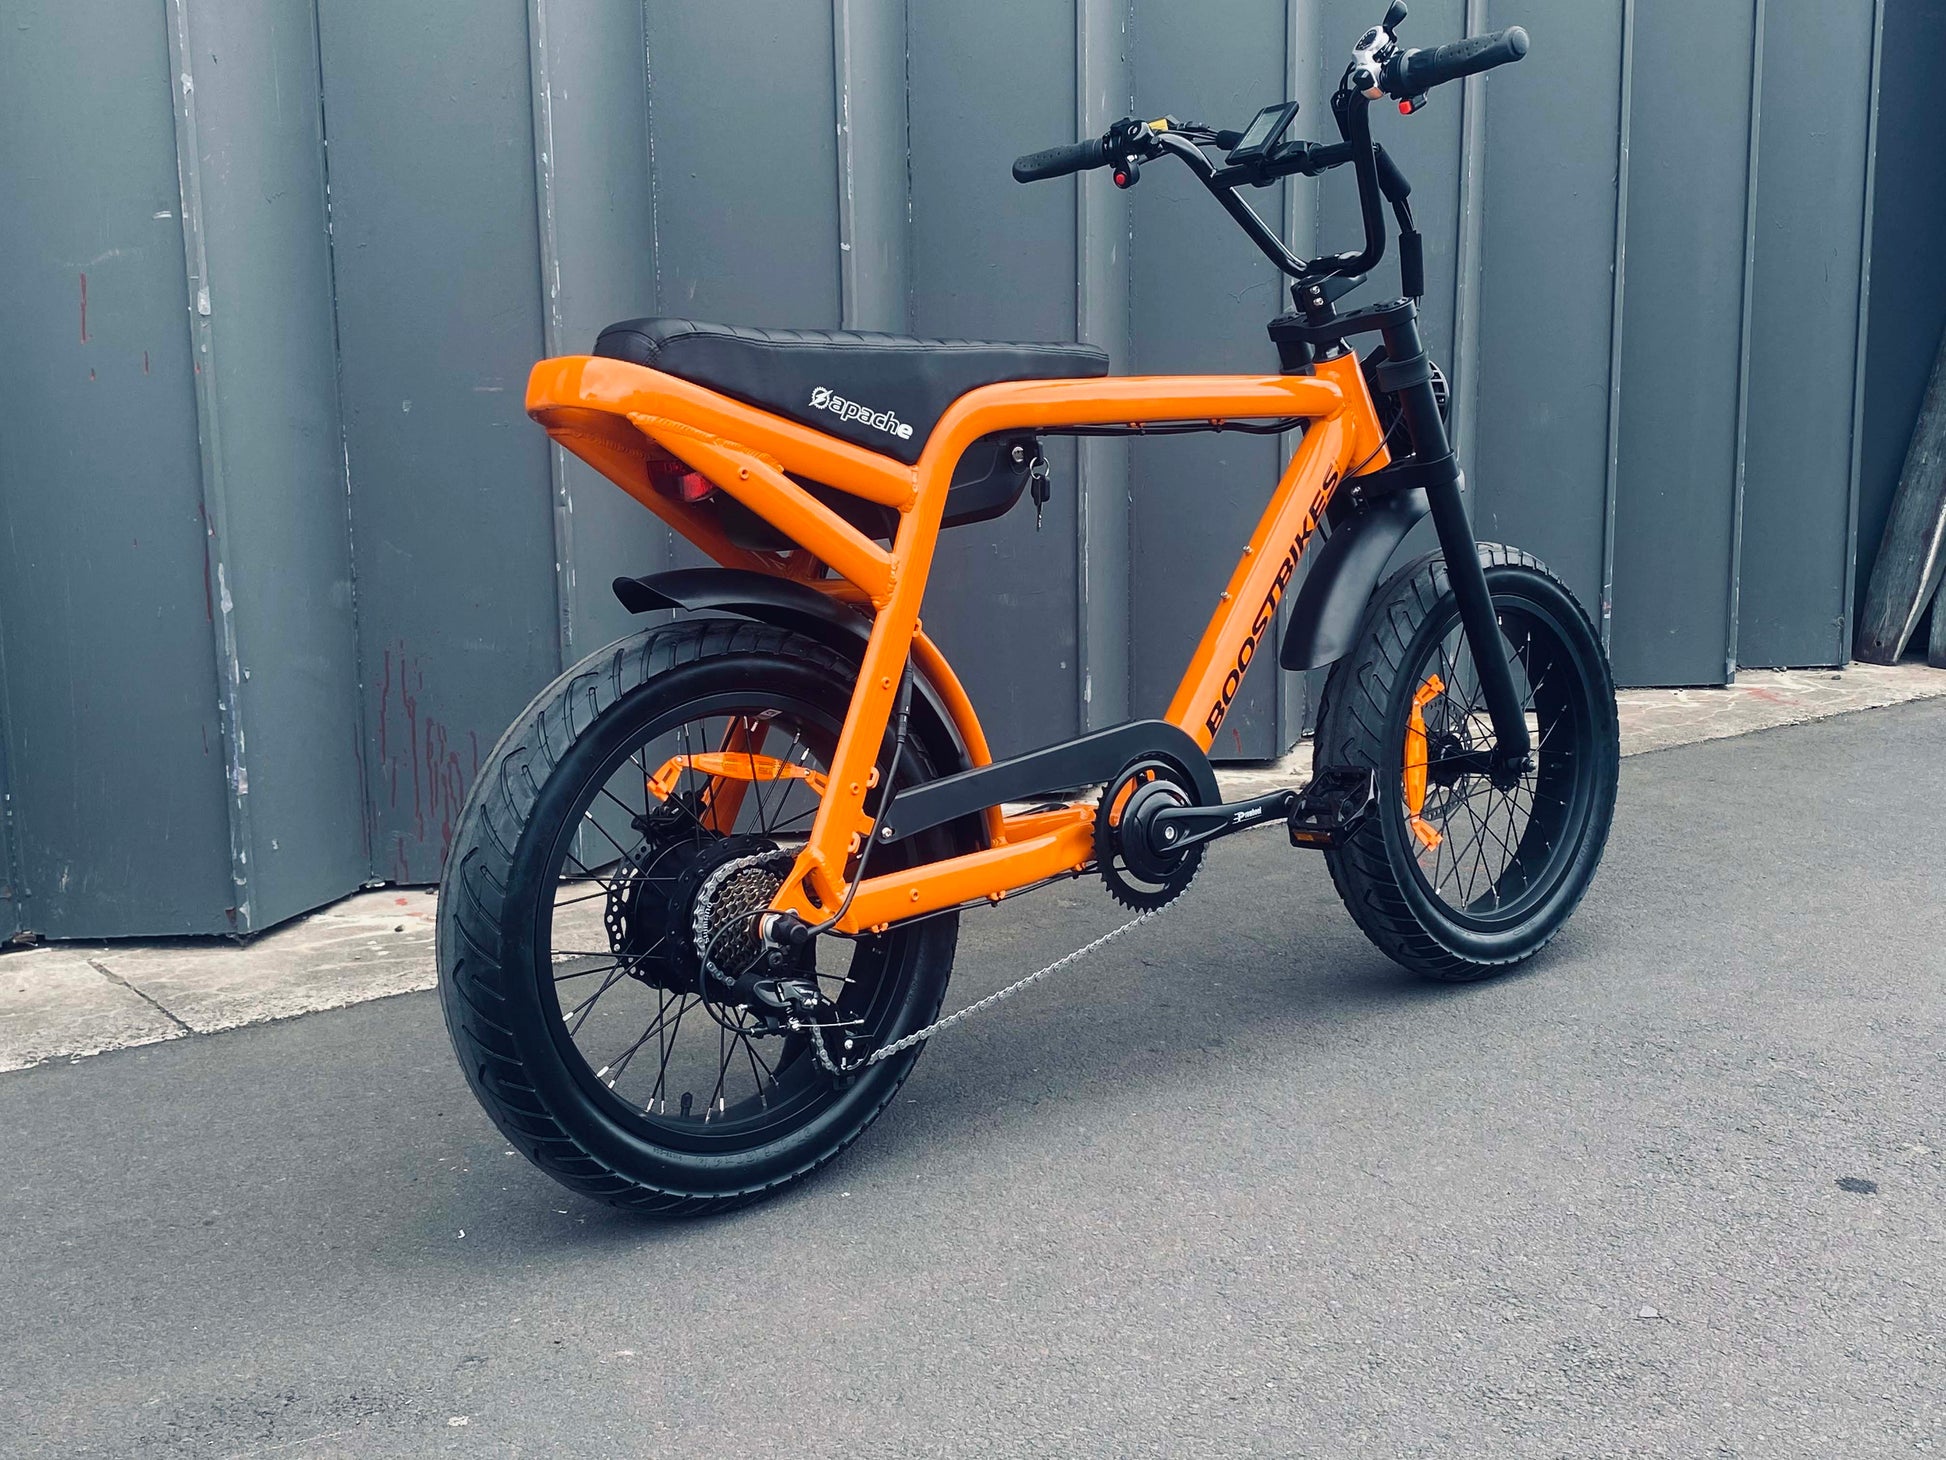 The Apache Electric Bike combines a great look, a comfortable riding position with quality components and manufacturing. From Boostbikes  Super 73 Matt Black, Papaya Orange or Nardo Grey Apache from Boostbikes